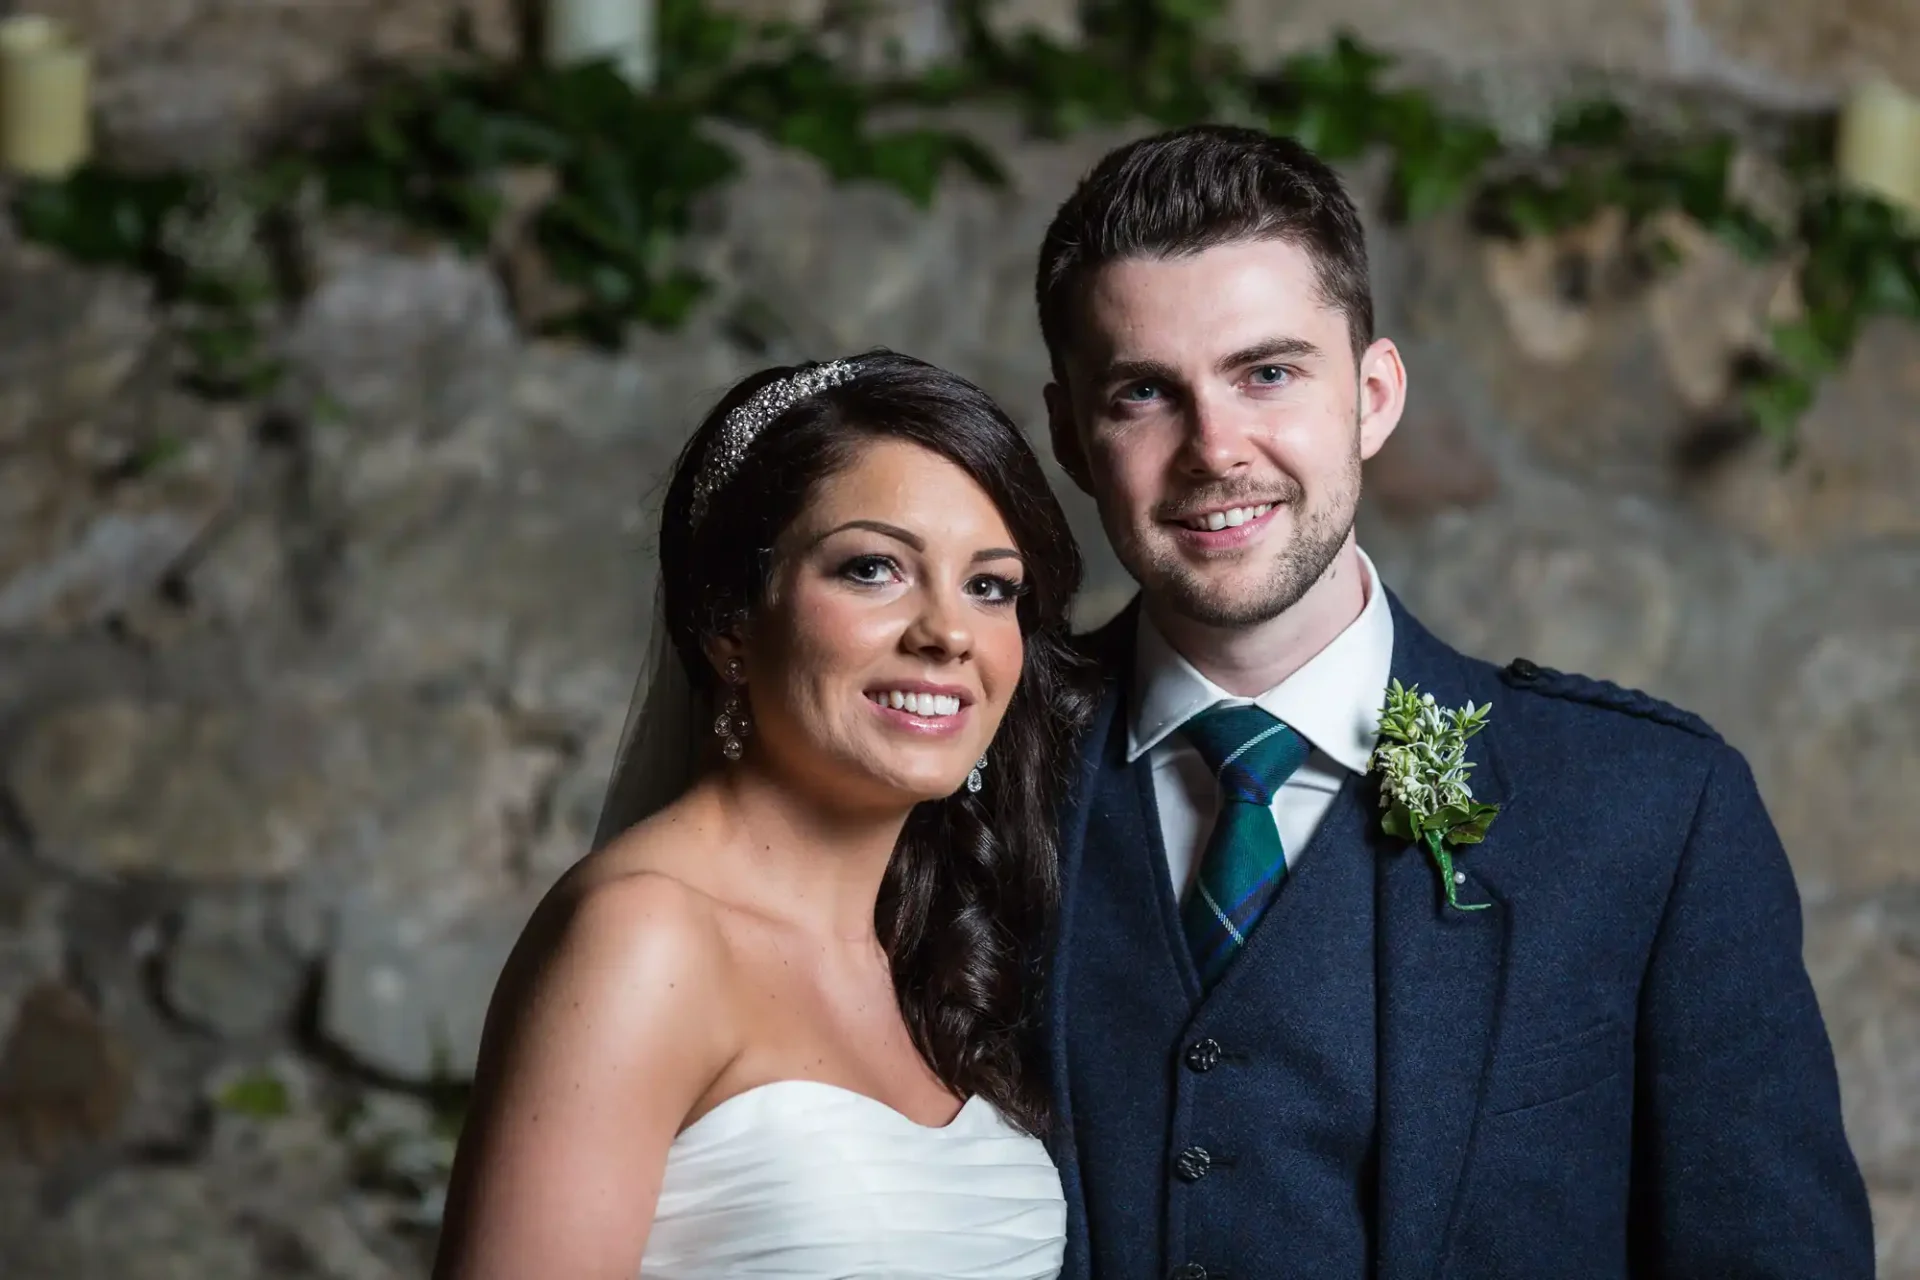 A bride and groom smiling for a photo, the bride in a white strapless dress and the groom in a dark suit with a tartan tie and green boutonniere.